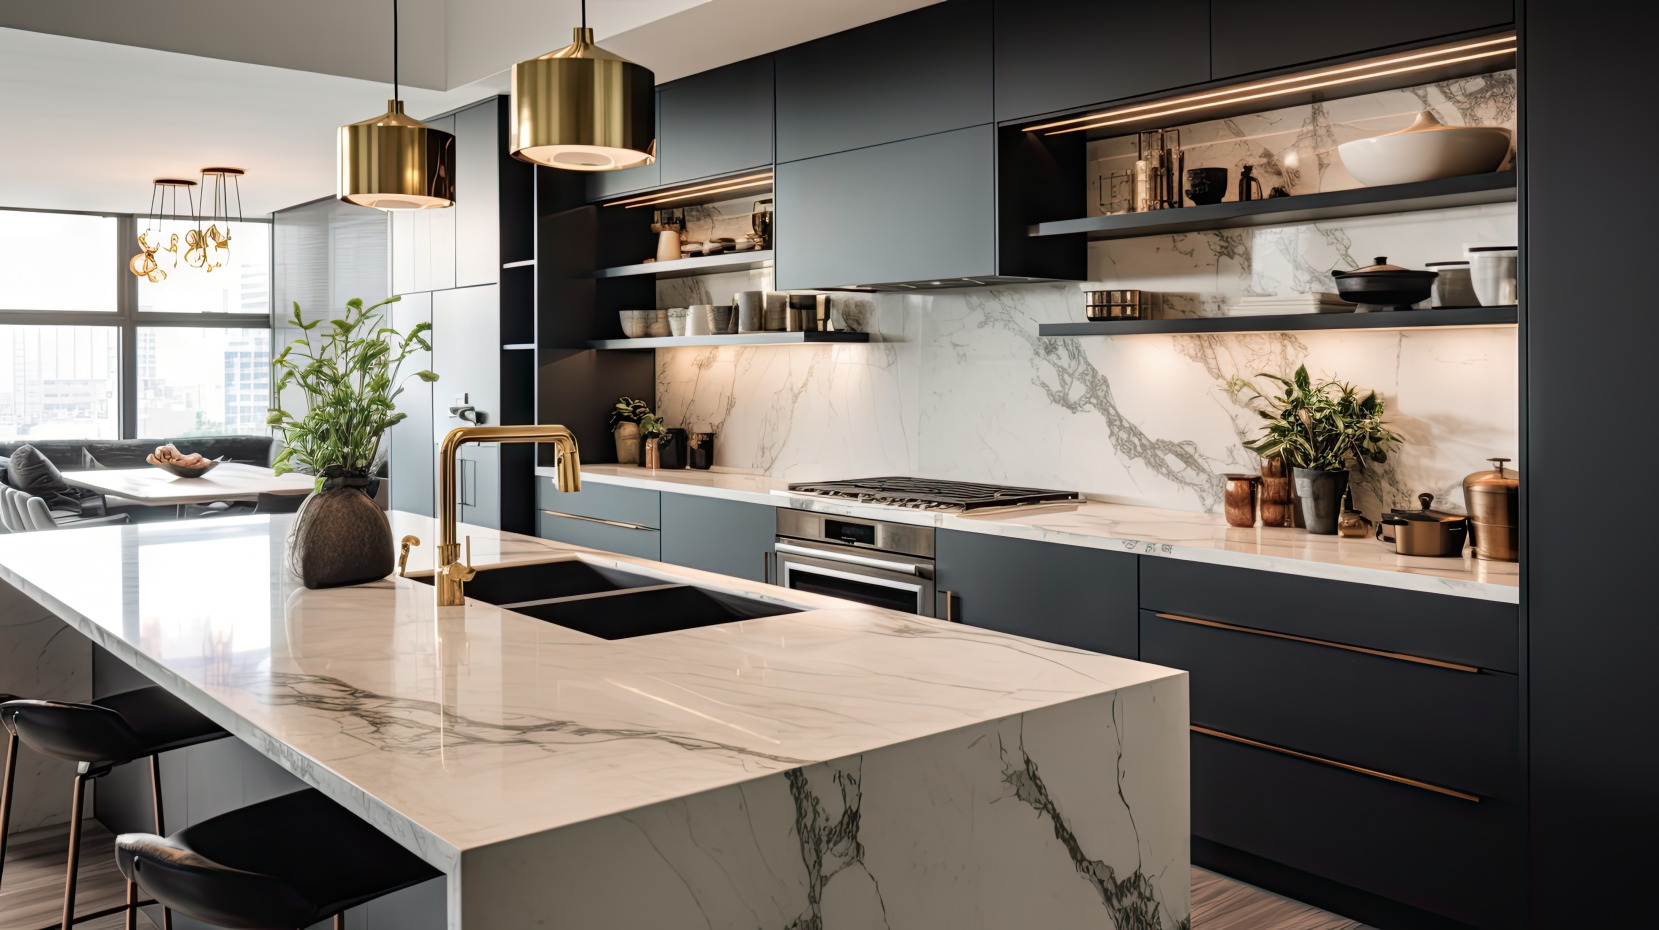 Chic contemporary kitchen with black and white cabinets, gold fixtures and marble tiles